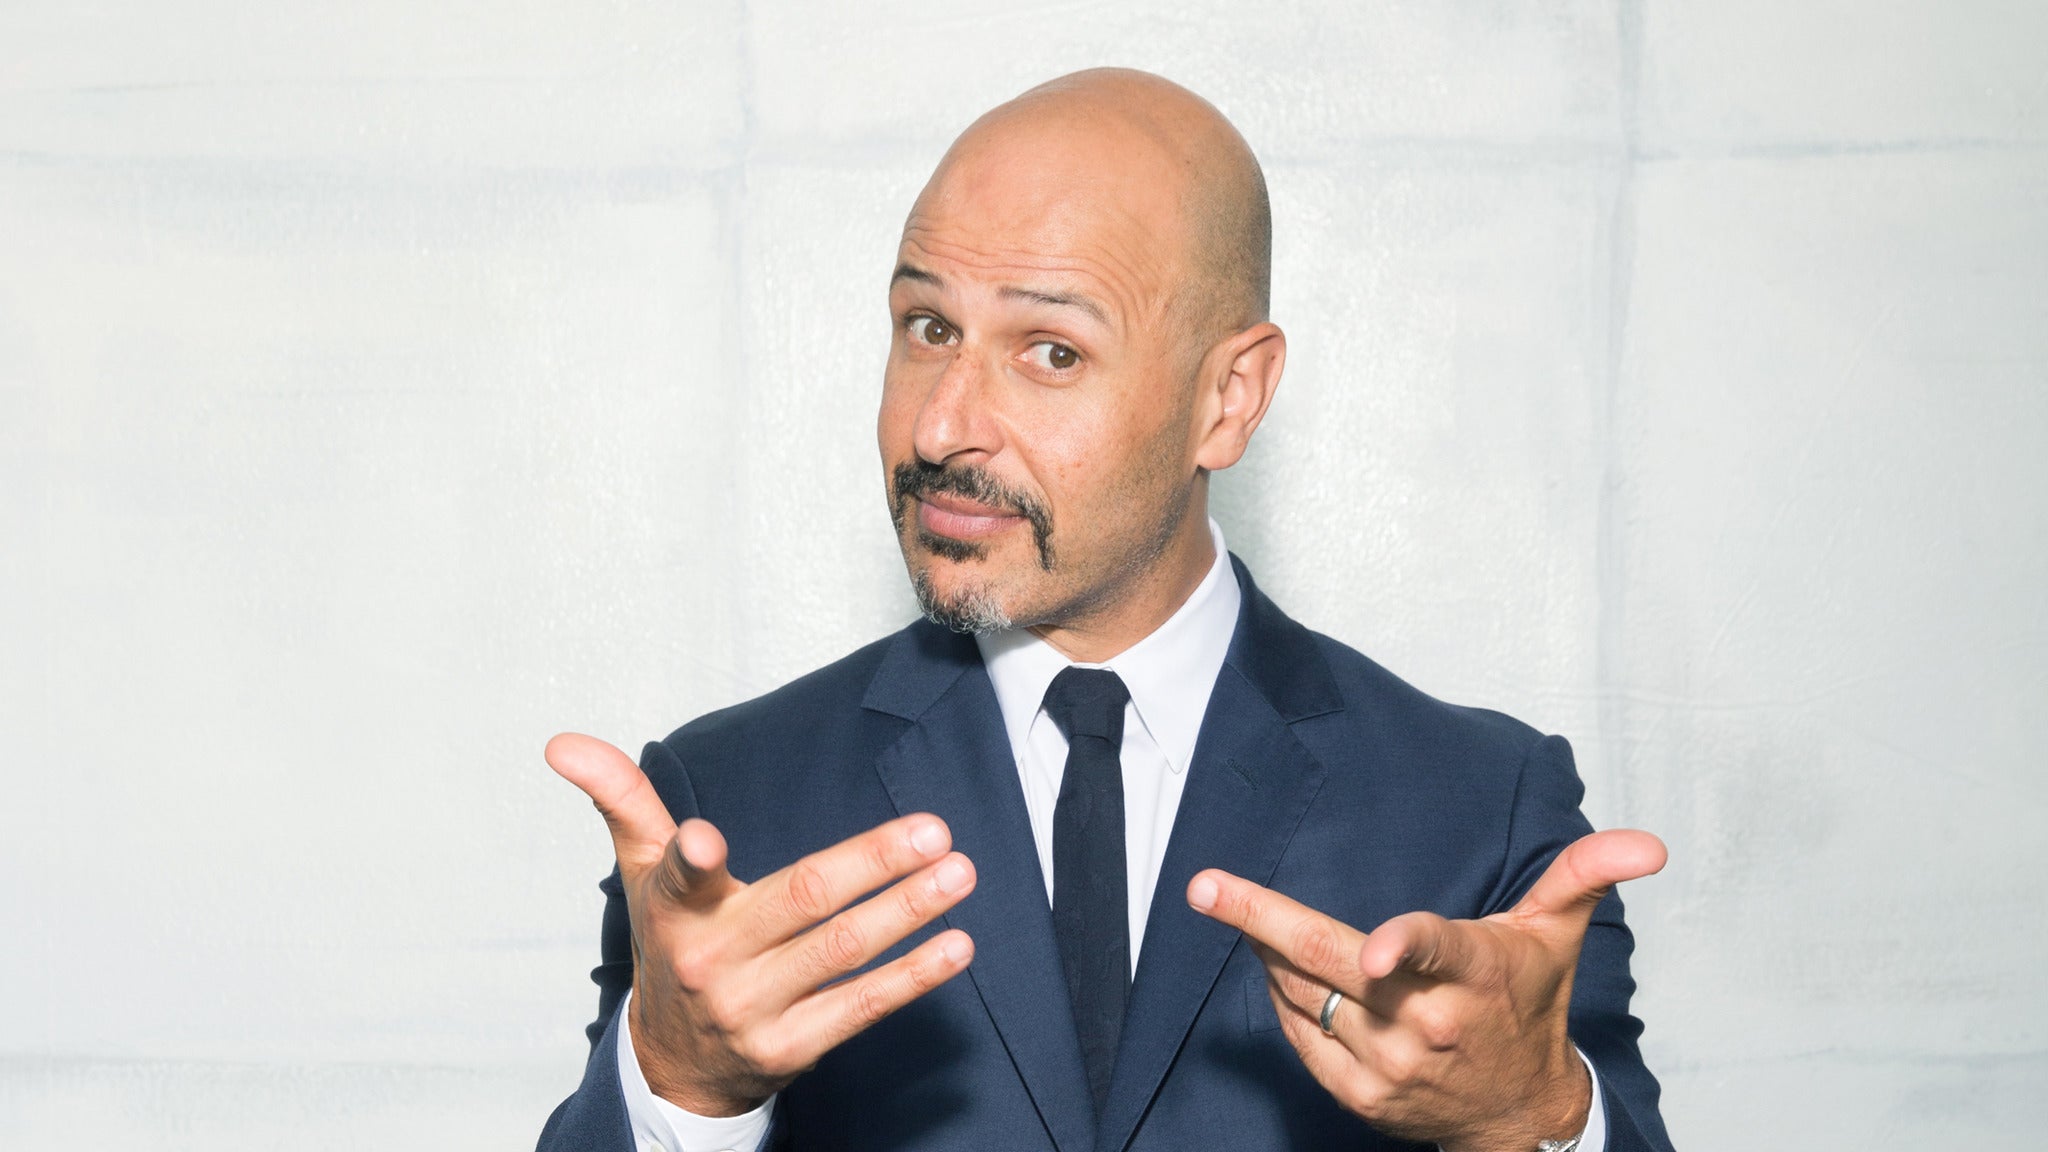 Maz Jobrani: Things Are Looking Bright Tour in Atlantic City promo photo for Ticketmaster / Social presale offer code